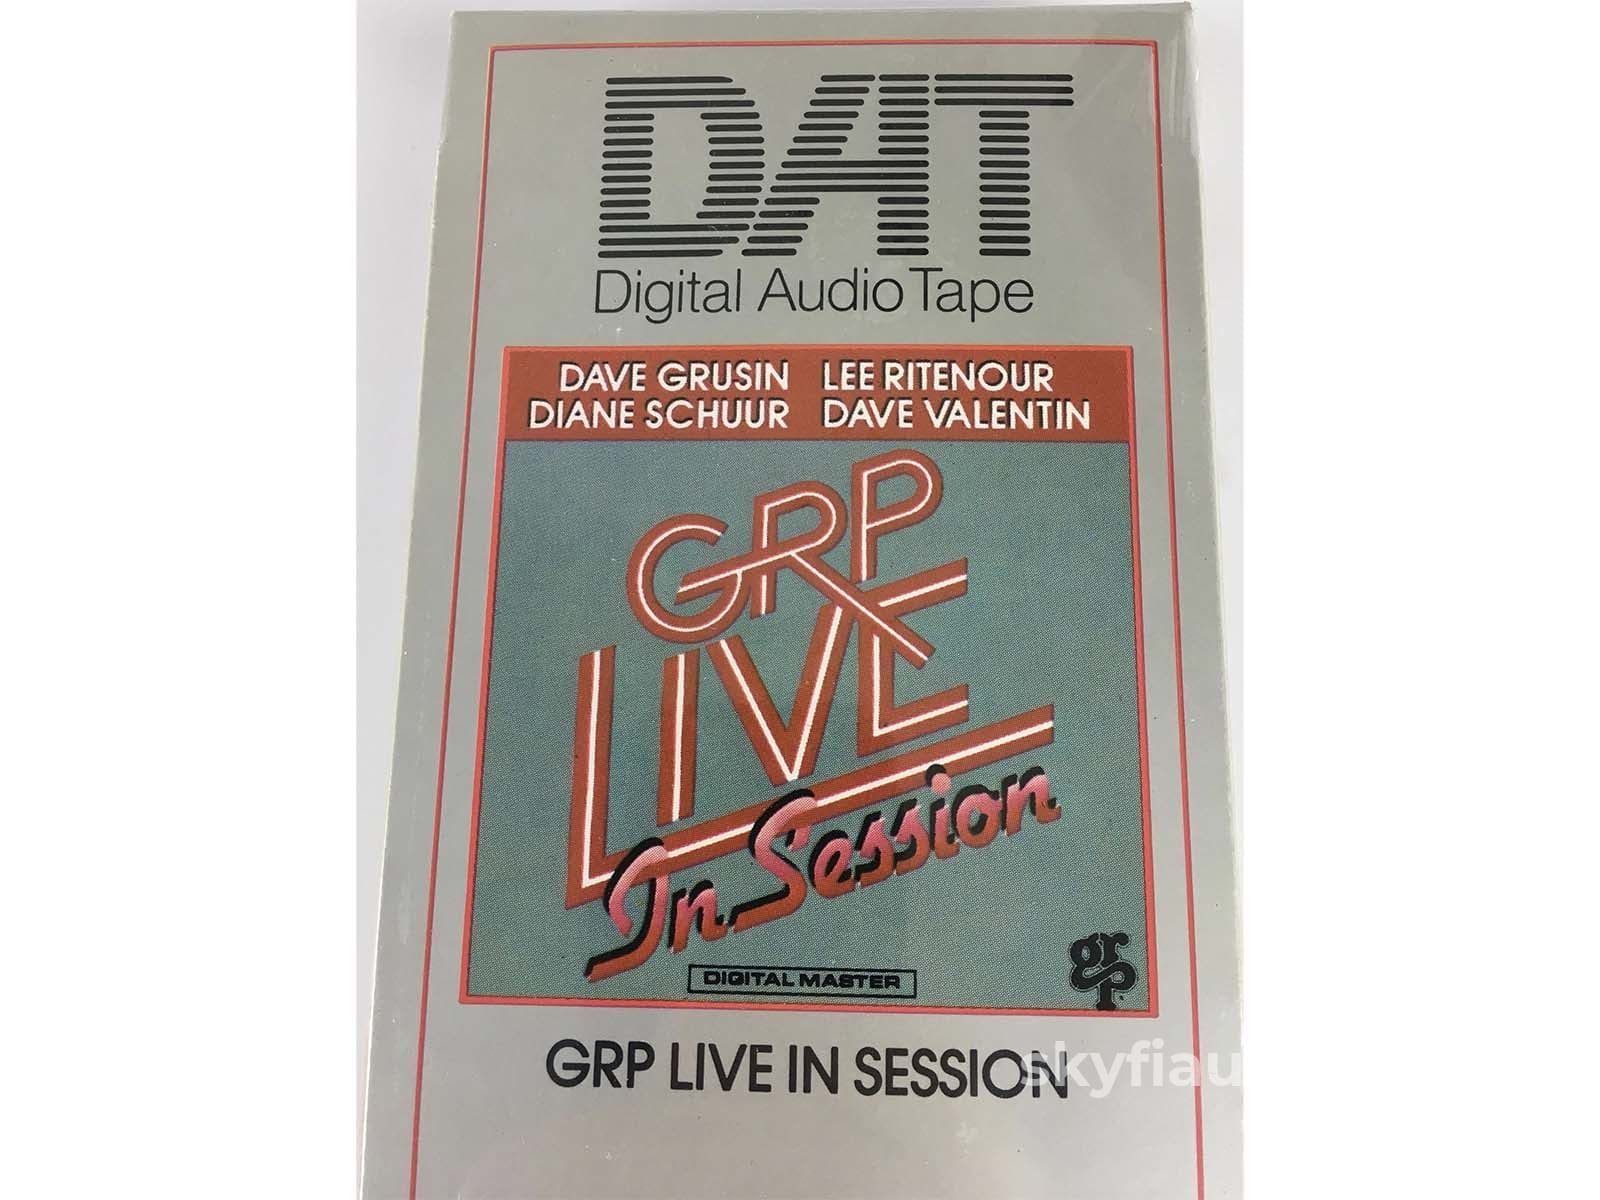 Grp - Live In Session New Pre-Recorded Dat Tape Music